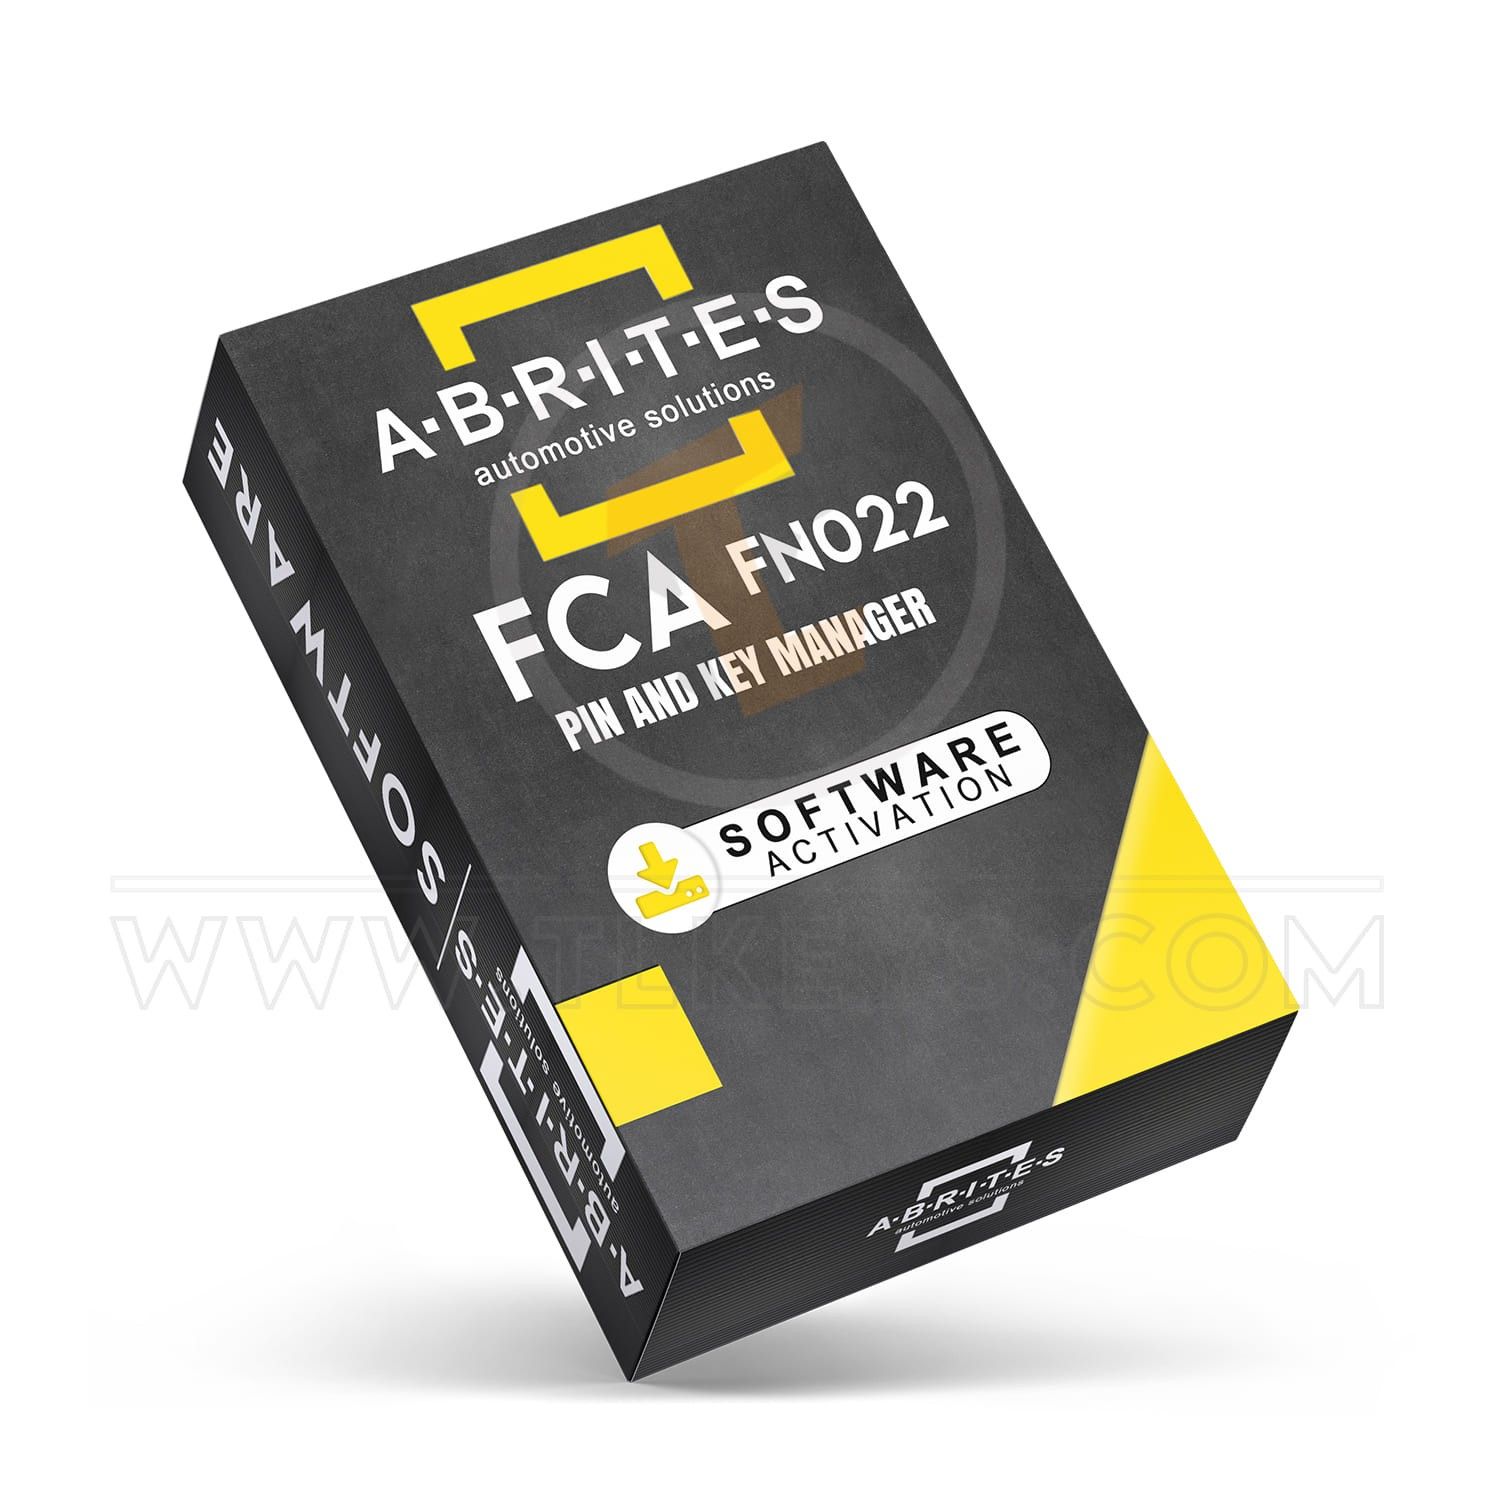 Abrites FN022 PIN AND KEY MANAGER FOR FCA VEHICLES software